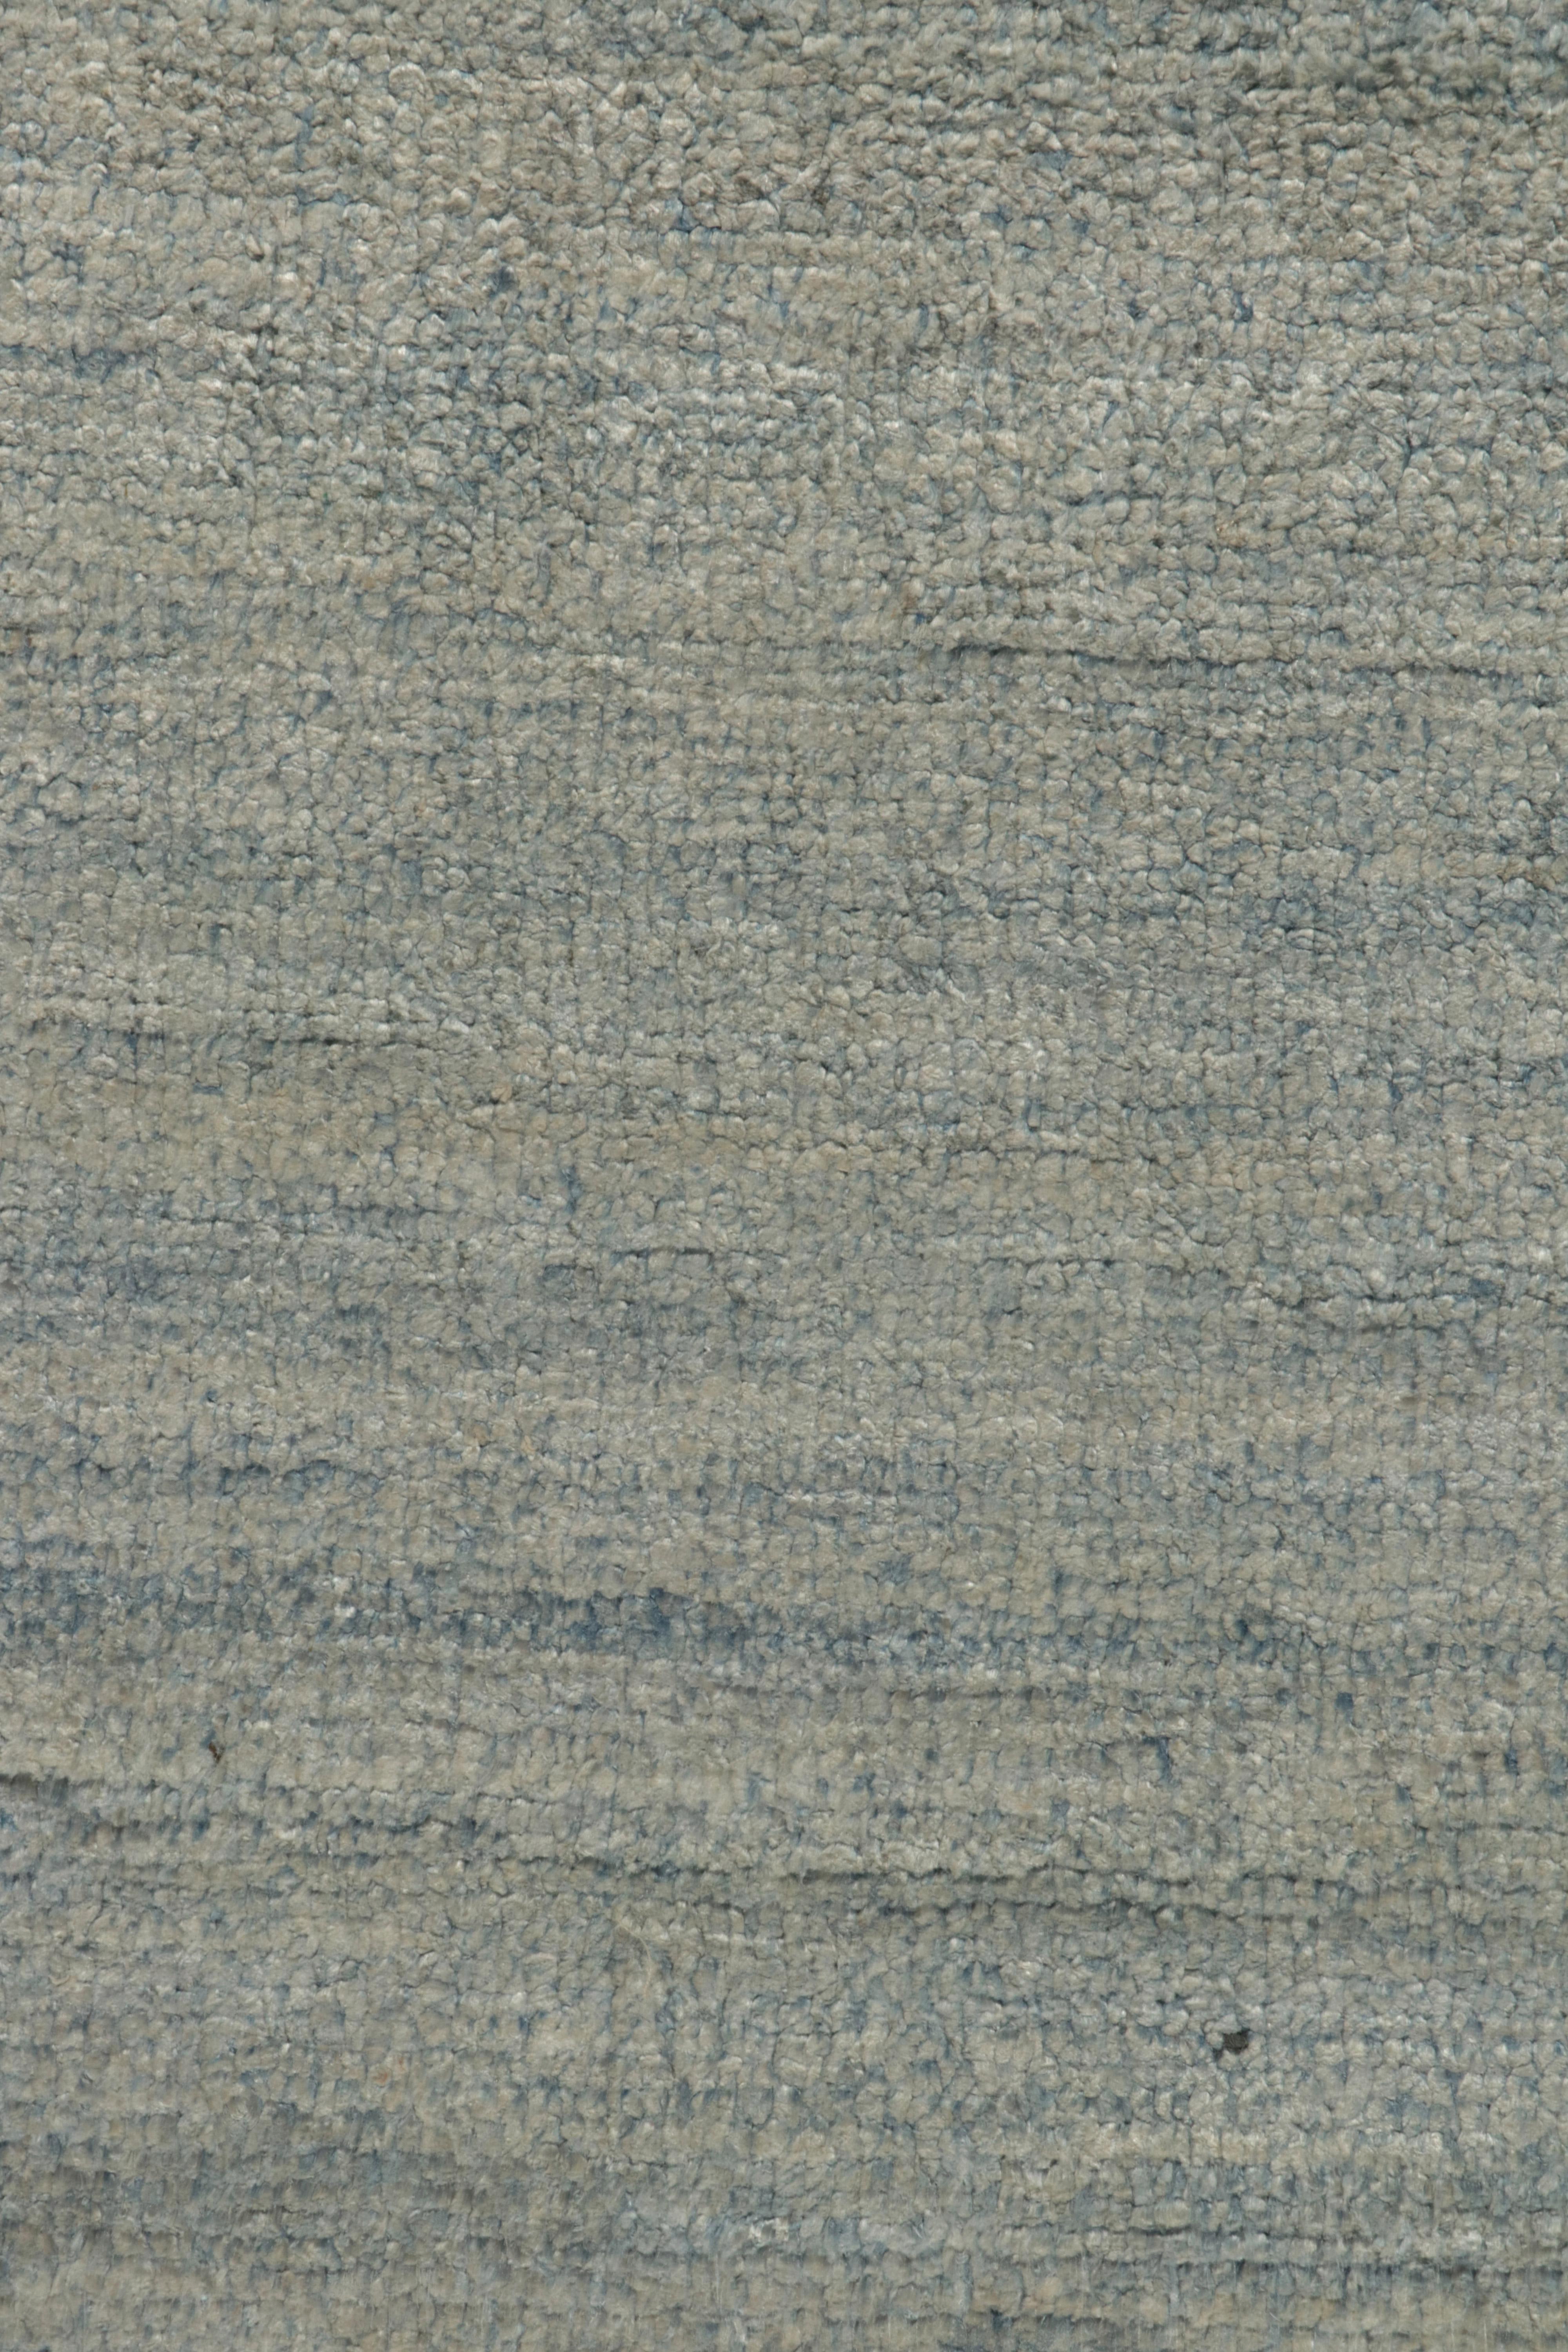 Rug & Kilim's Hand-Knotted Contemporary Runner in Simple Blue, Gray Striations For Sale